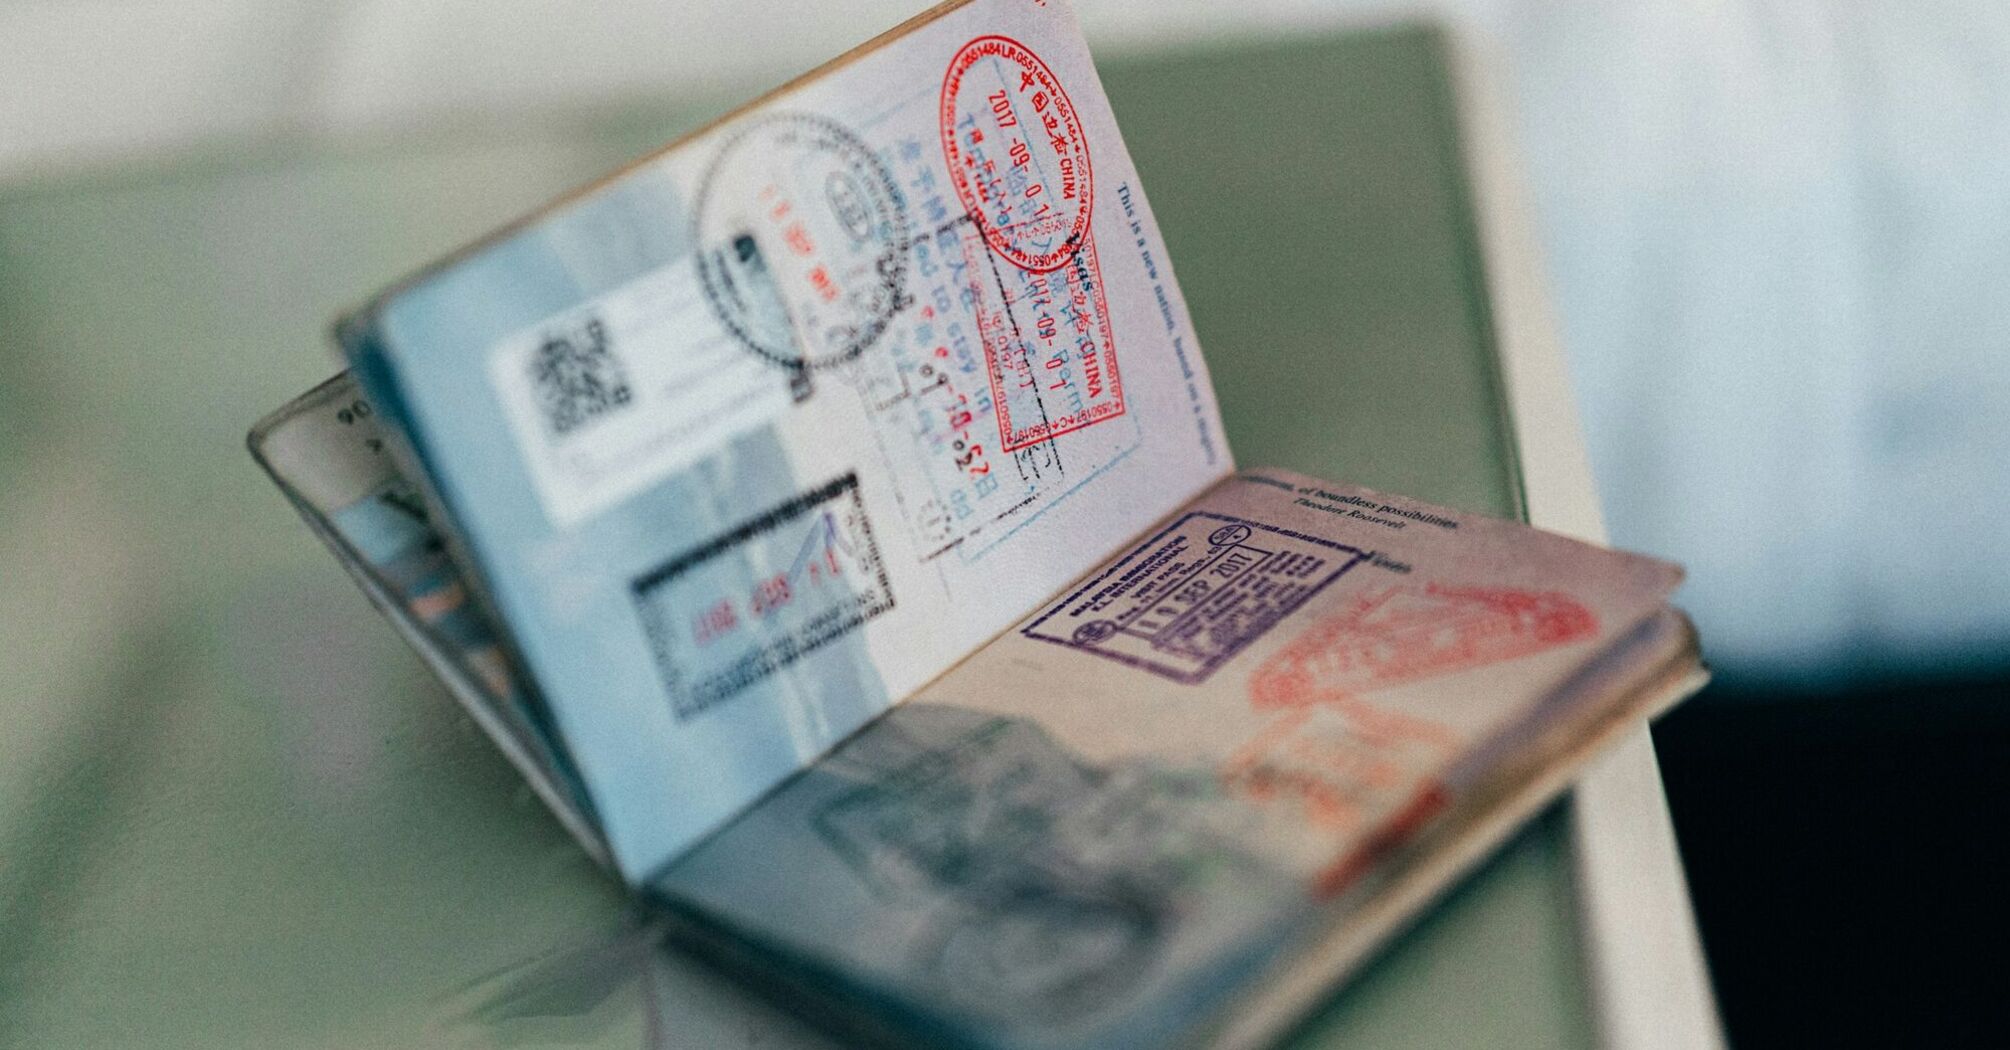 Passport with multiple visa stamps